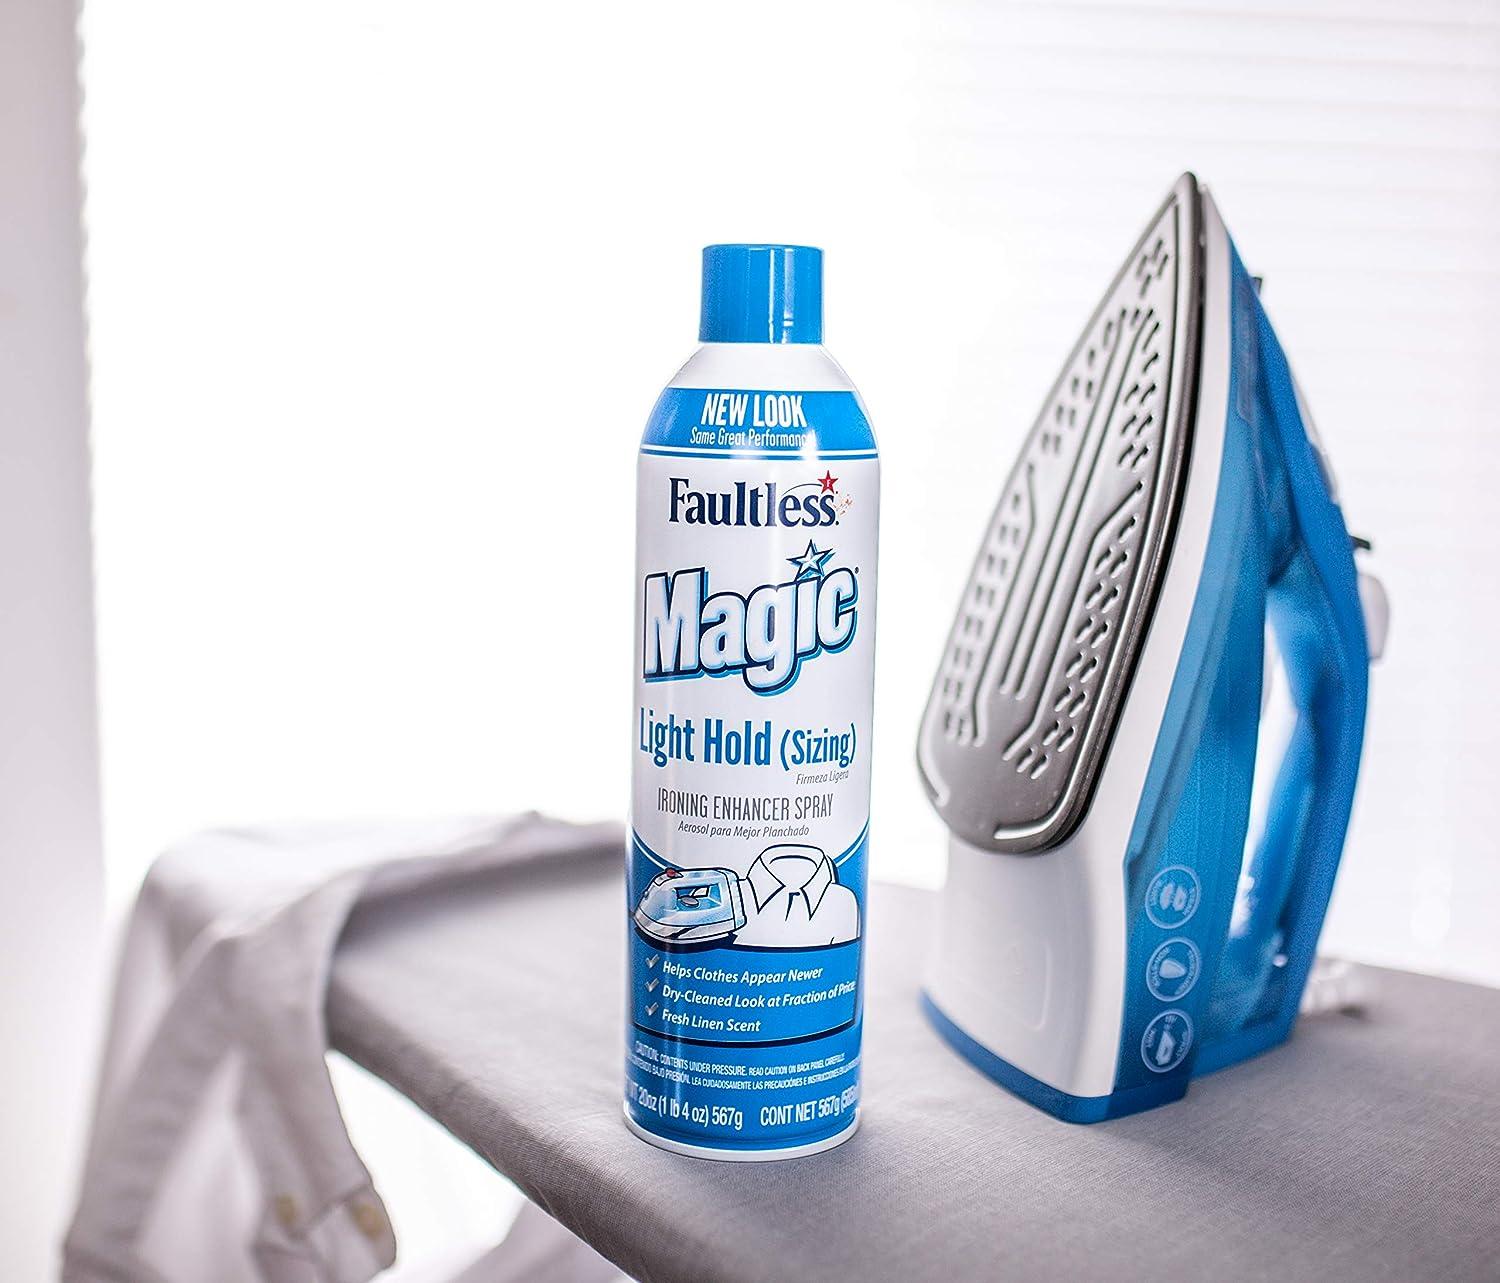 MAGIC Sizing Spray Light Body No Flaking or Clogging! Light Ironing Spray  20oz Wrinkle Iron Spray for Clothes (Pack of 2) Fresh Linen Scent Finishing  Spray